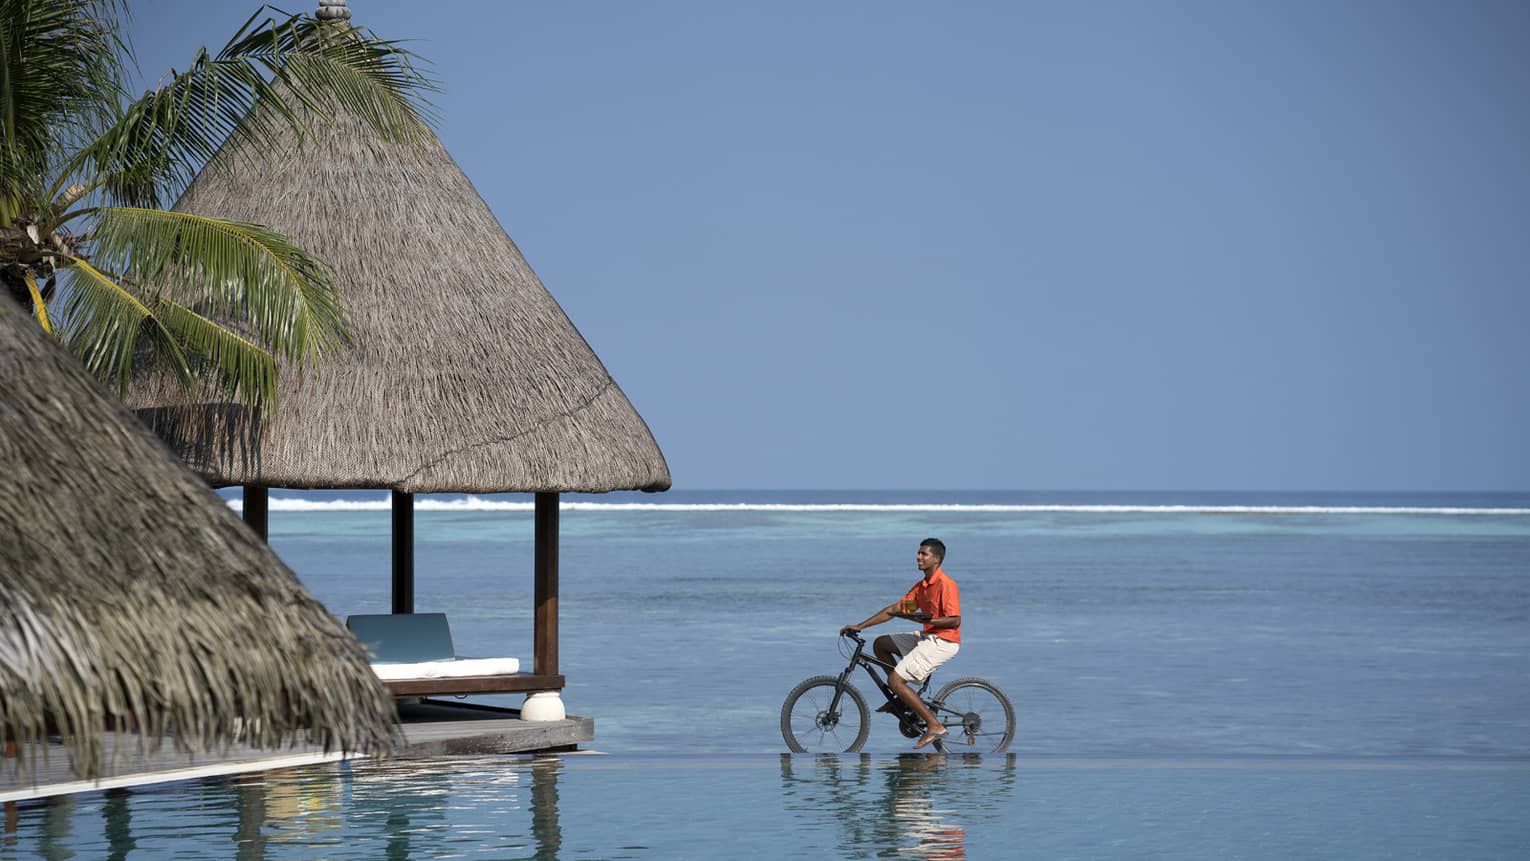 Man riding bicycle in shallow water, view of vast sea behind him